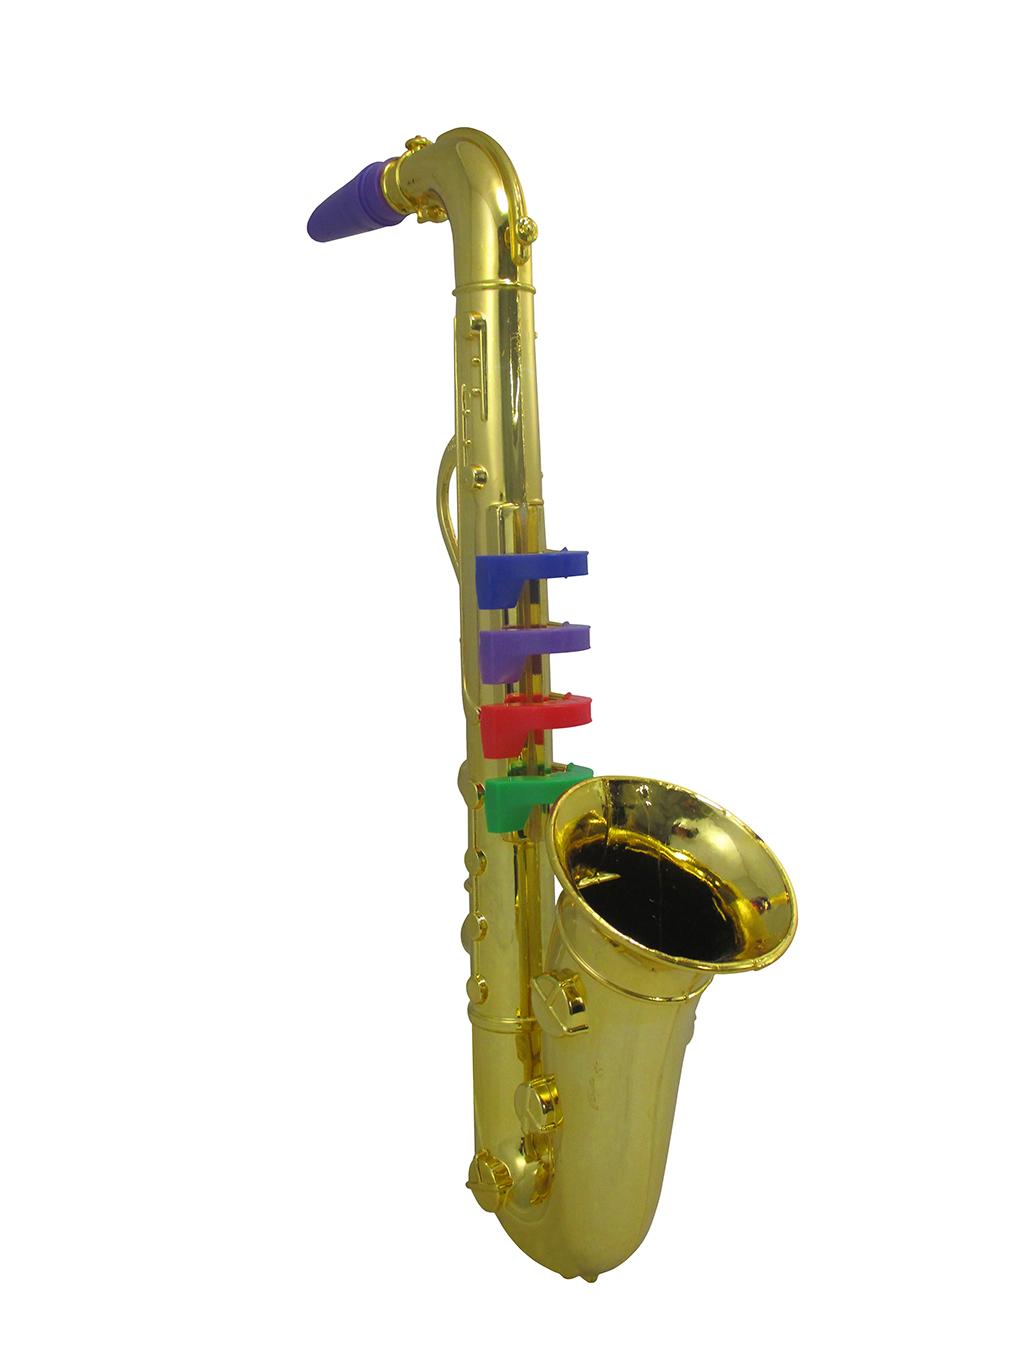 EXCEART Fake Saxophone Toy Simulation Music Saxophone Model Childrens Music  Toy Trumpet Musical Wind Instruments for Kids Gift Silver